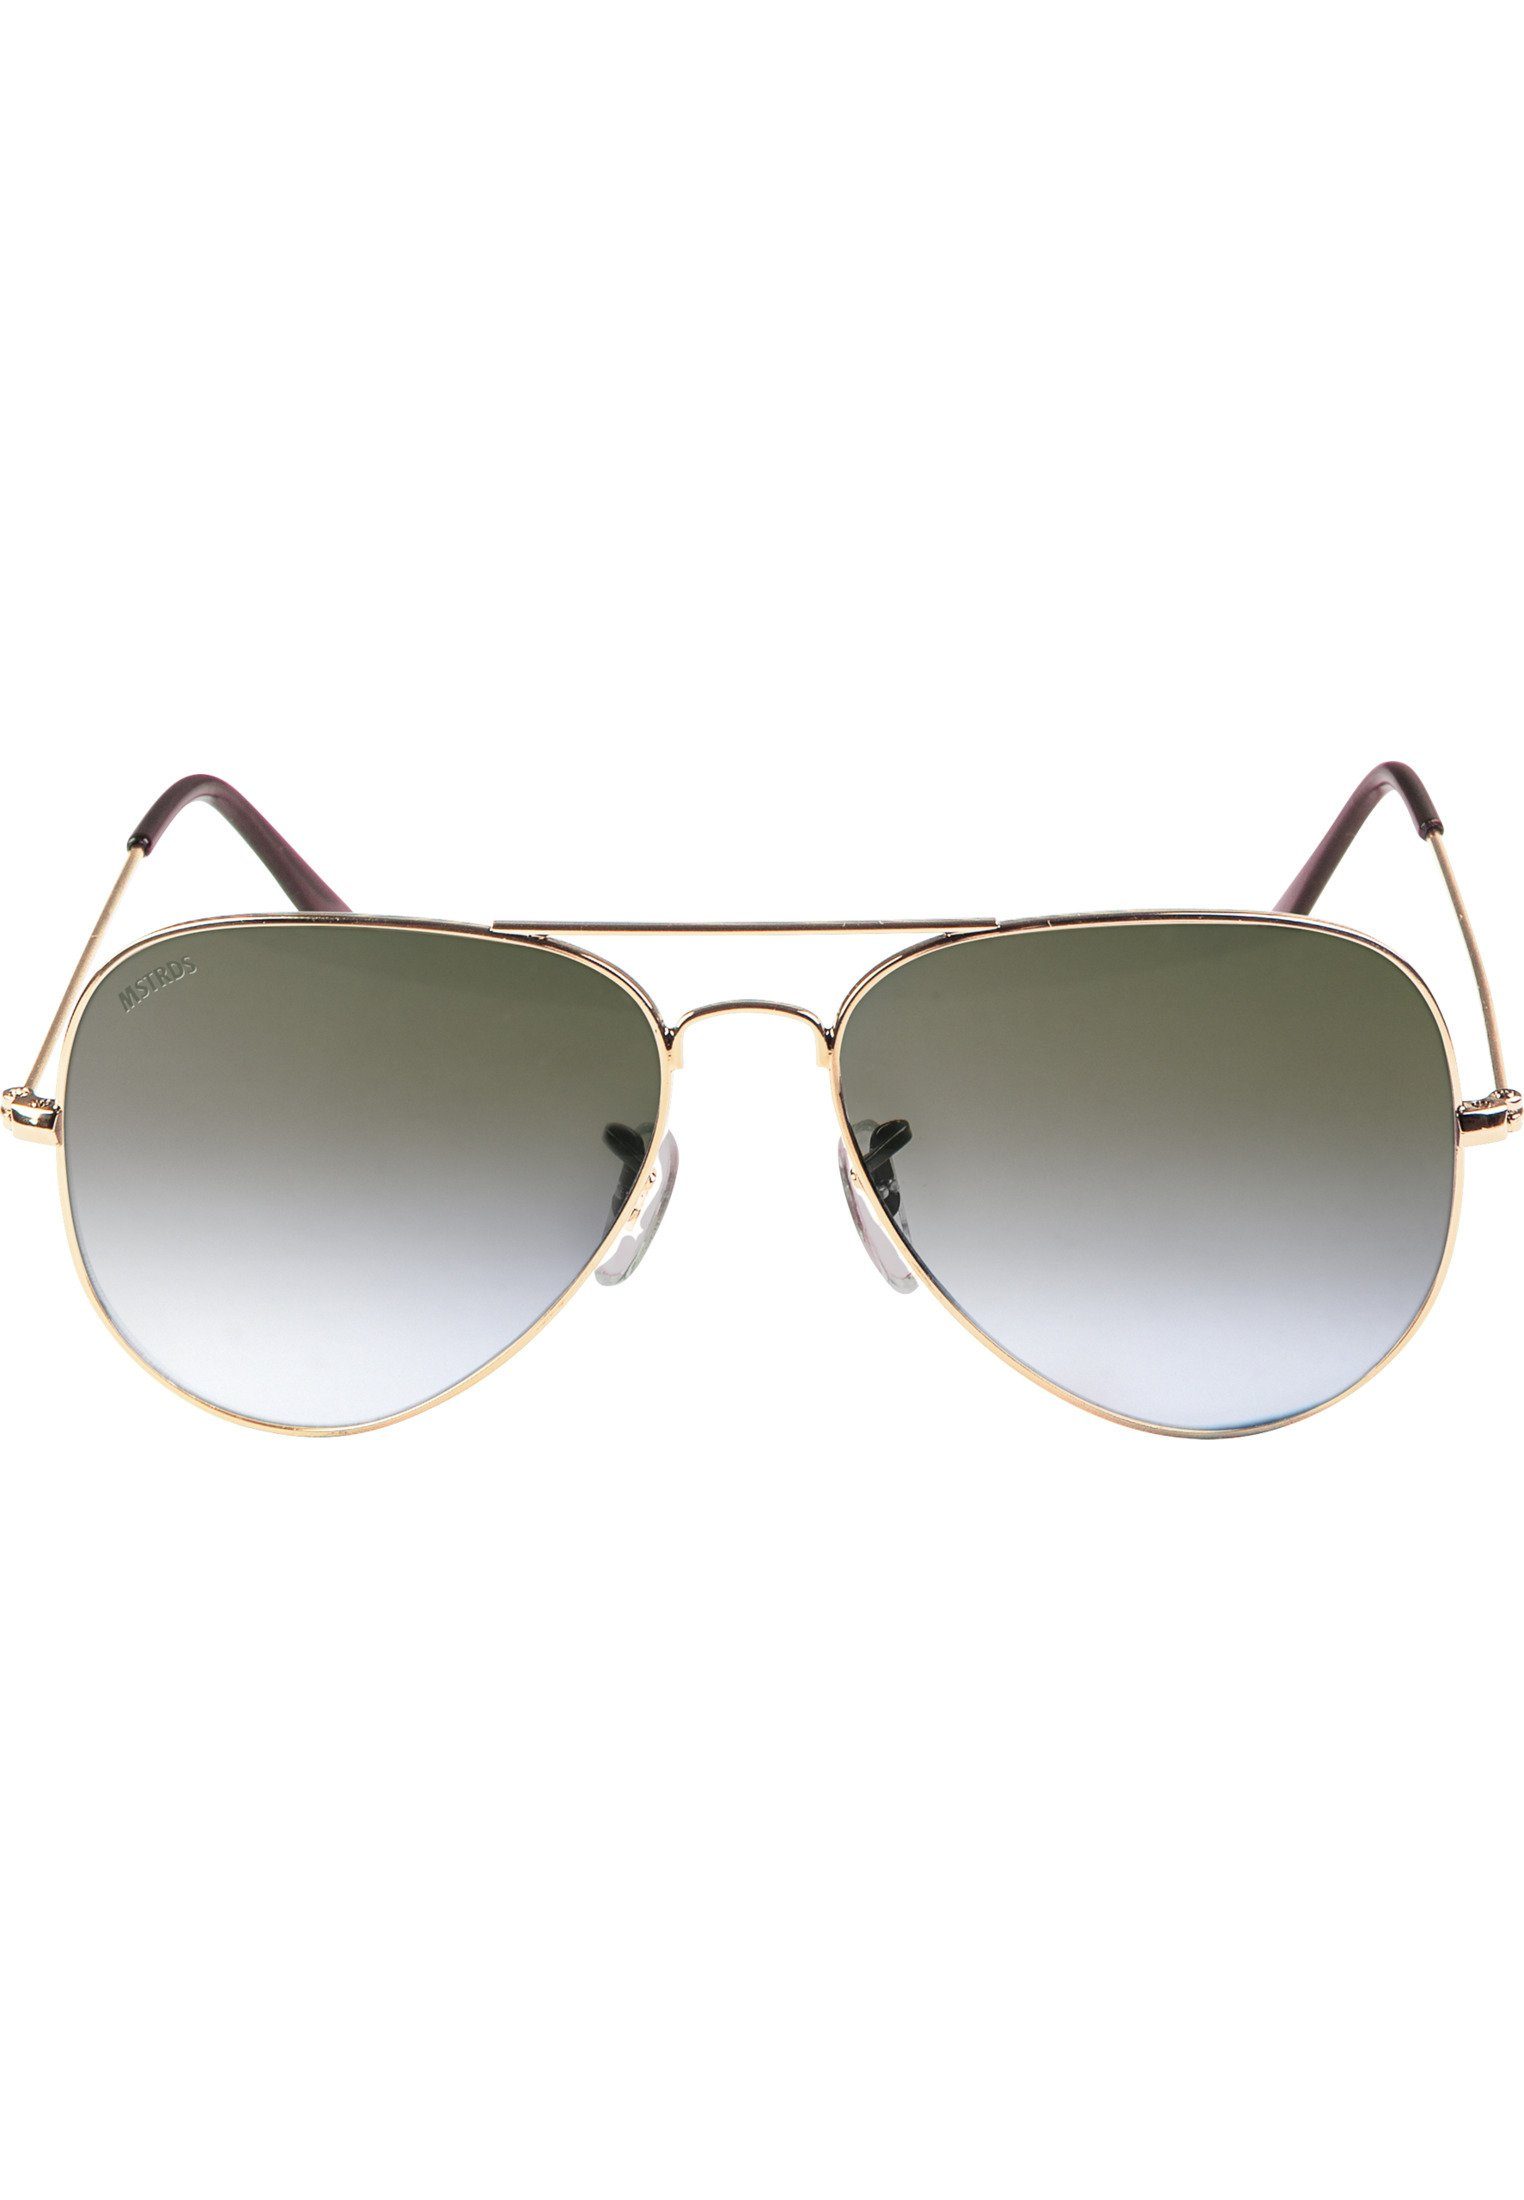 MSTRDS Sonnenbrille Accessoires Sunglasses PureAv Youth gold/grey